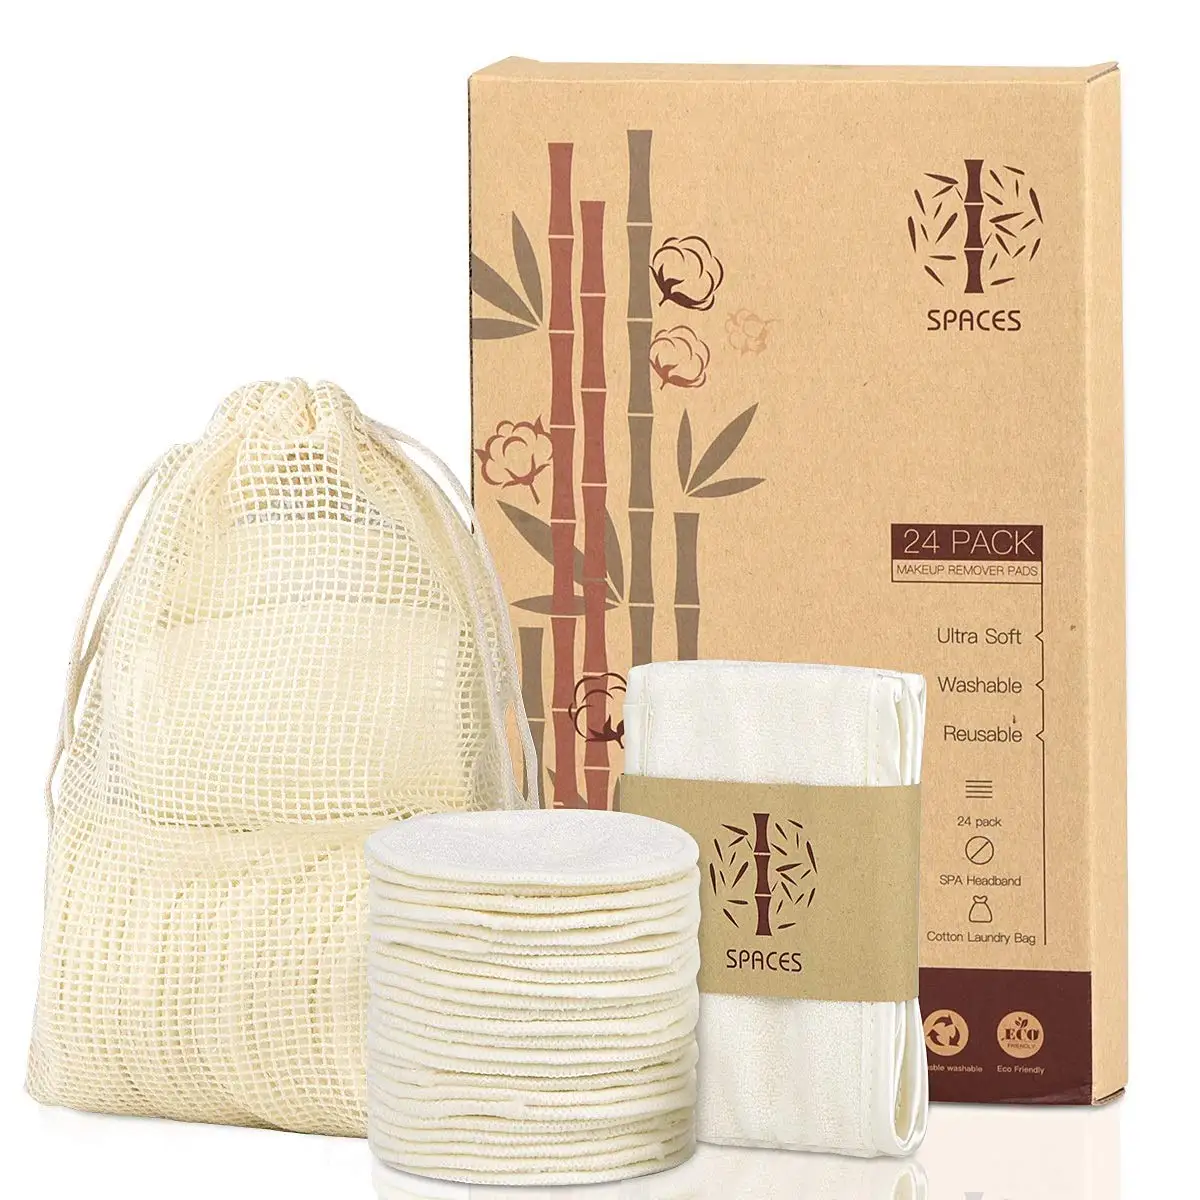 

High Quality Organic Cotton Rounds Washable Eco Friendly Bamboo Makeup Rmover Pads